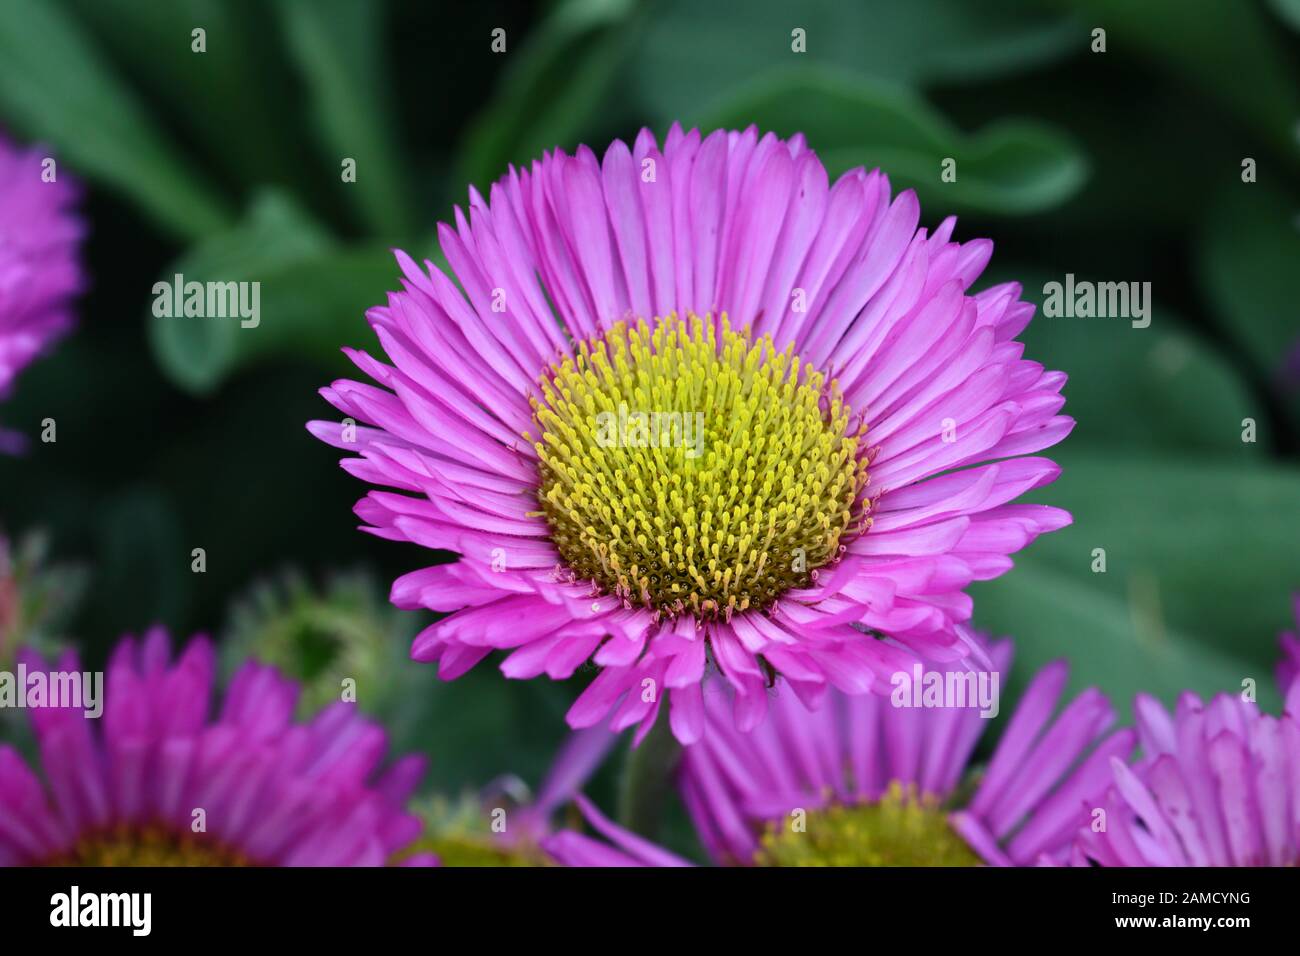 Erigeron Pink Jewel or Fleabane Daisies have similar flowers to the fall blooming Michaelmas Daisies, but produce a showy summer-long display. Stock Photo